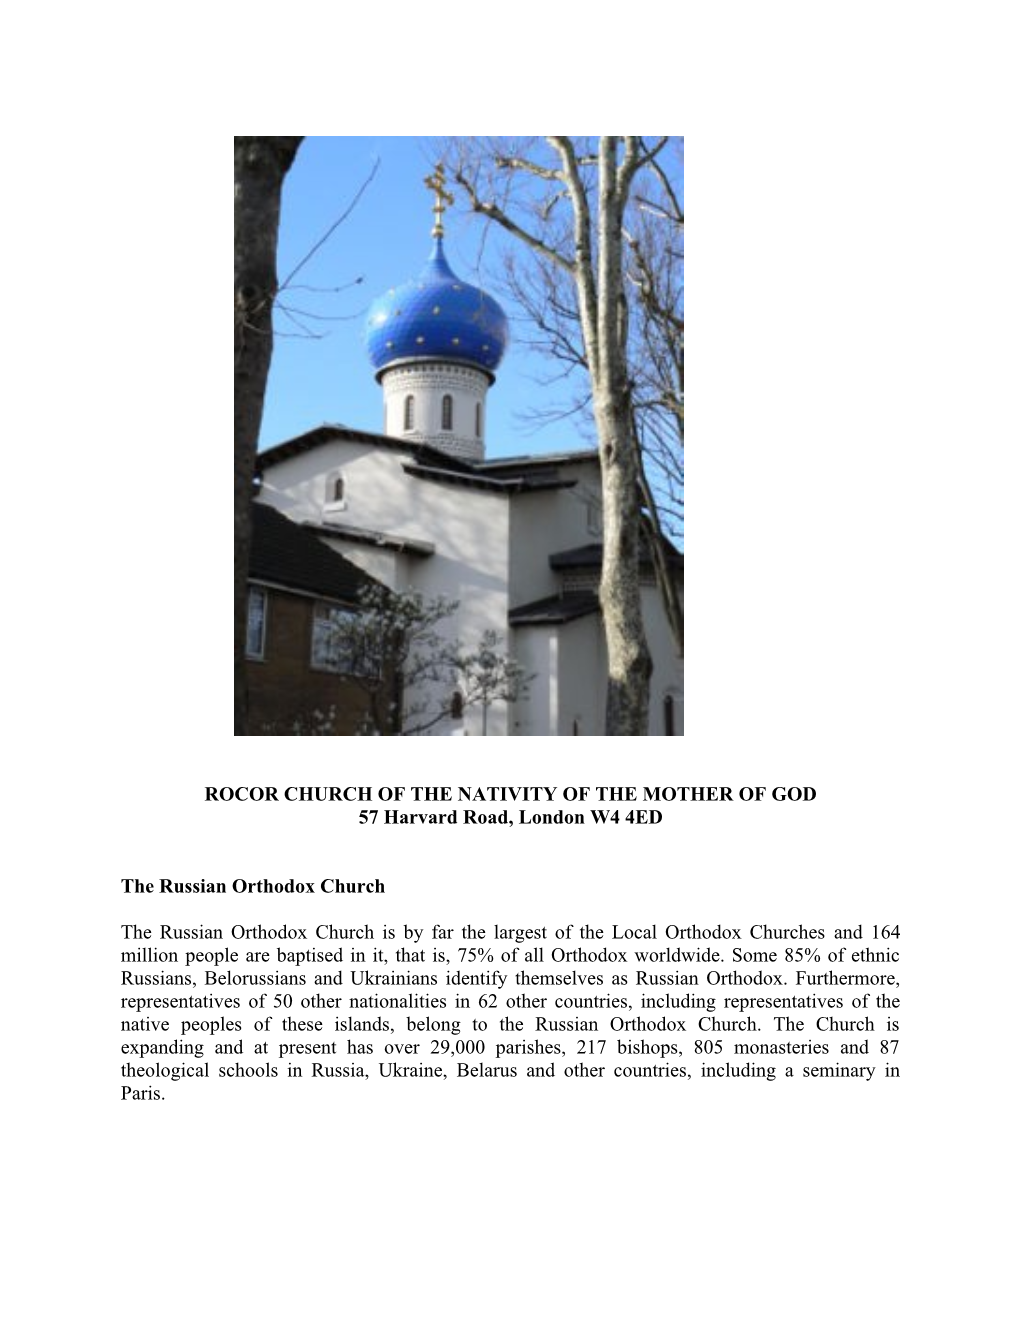 ROCOR CHURCH of the NATIVITY of the MOTHER of GOD 57 Harvard Road, London W4 4ED